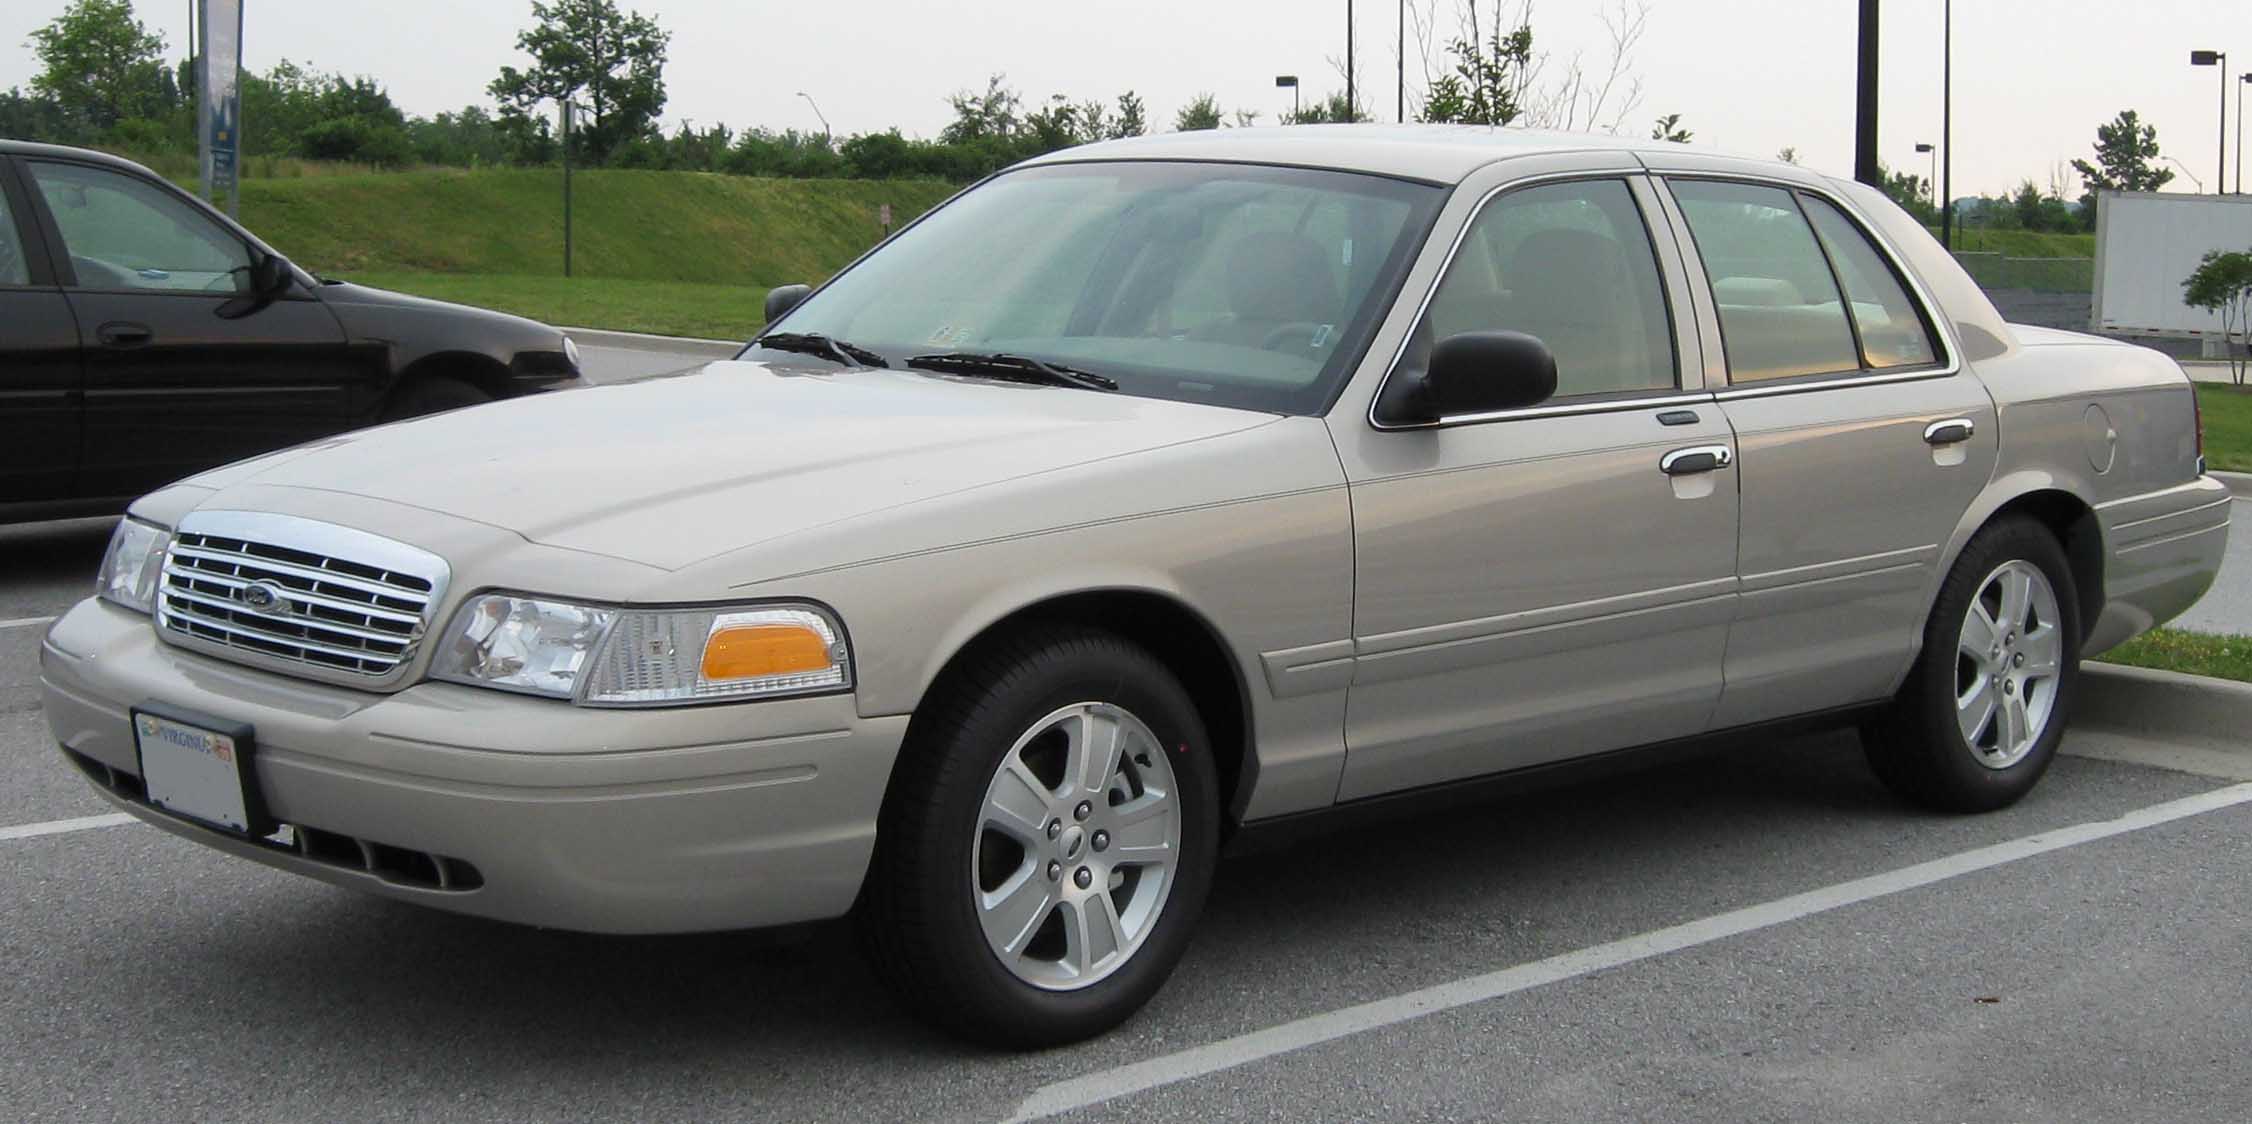 Ford Crown Victoria #1